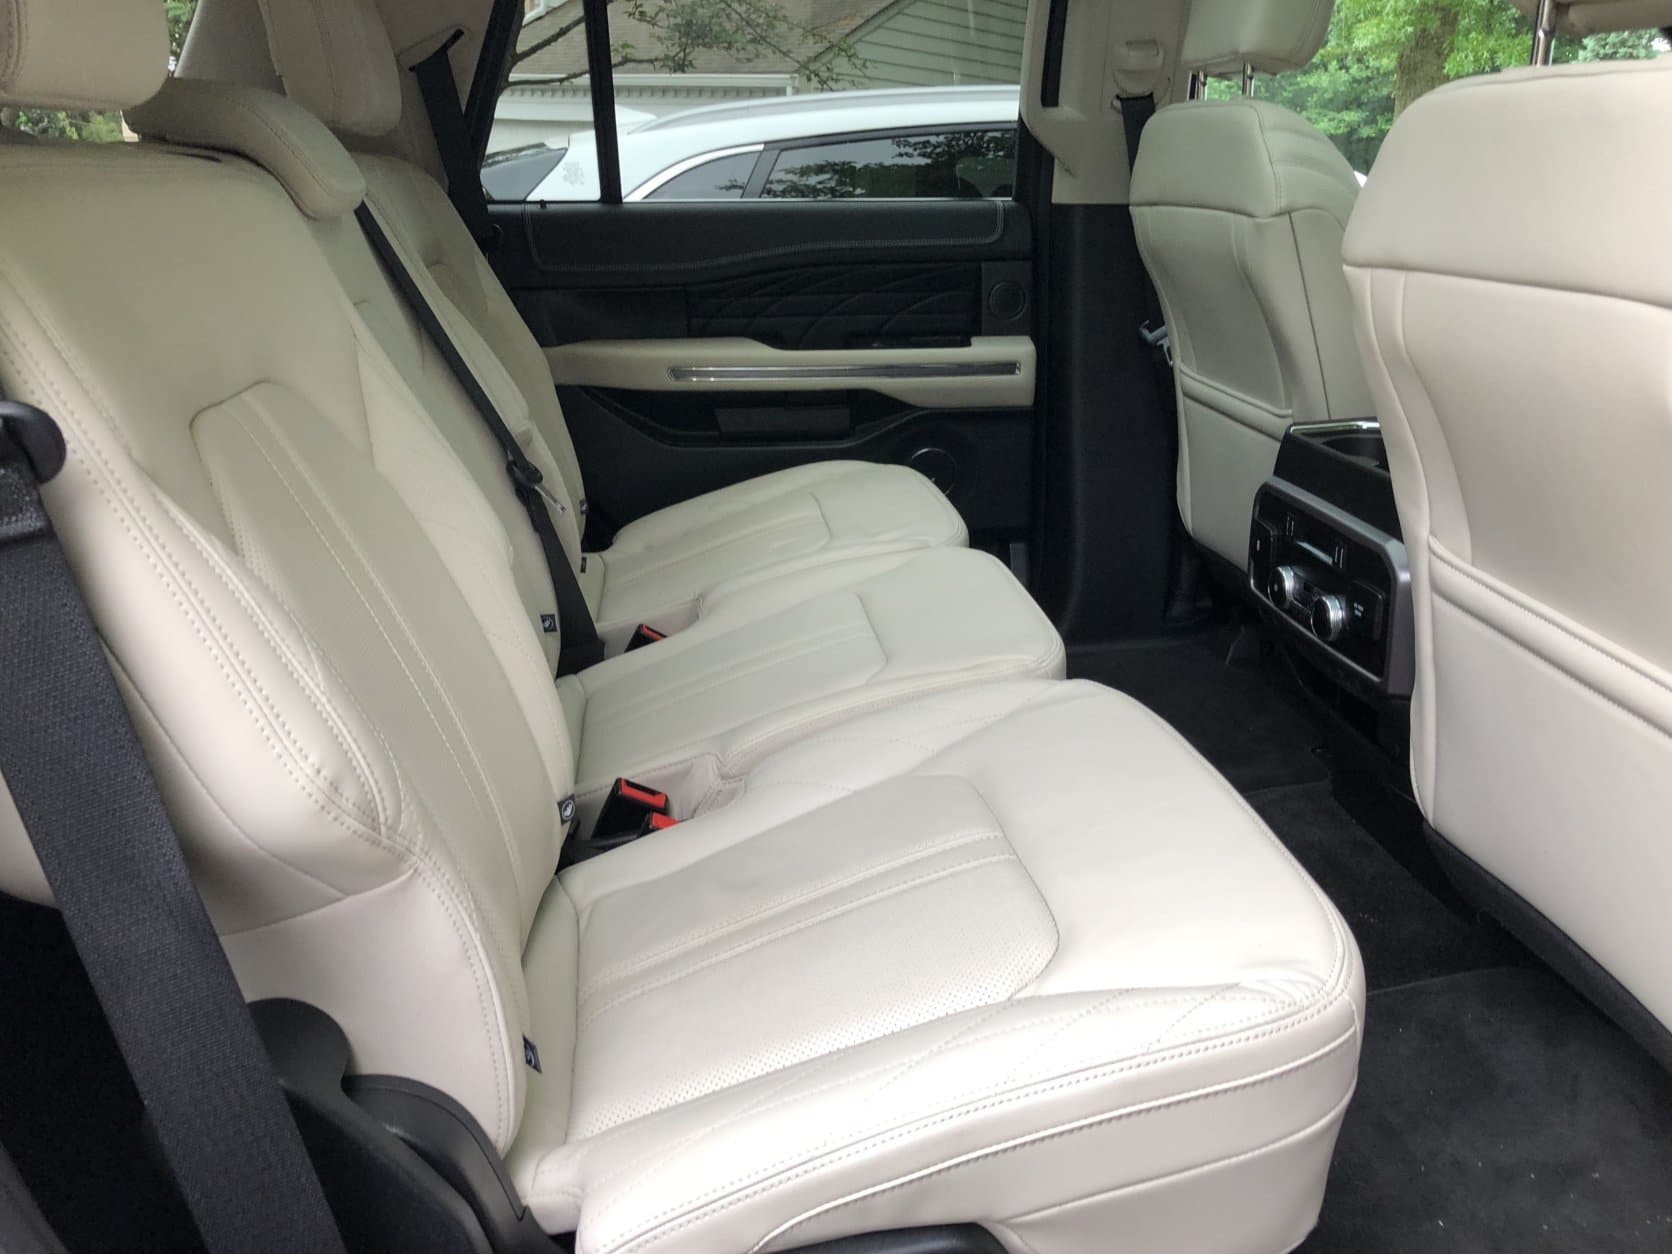 If you're in the market for a large SUV, you expect a good amount of space and the Expedition delivers with seating for up to eight people. (WTOP/Mike Parris)